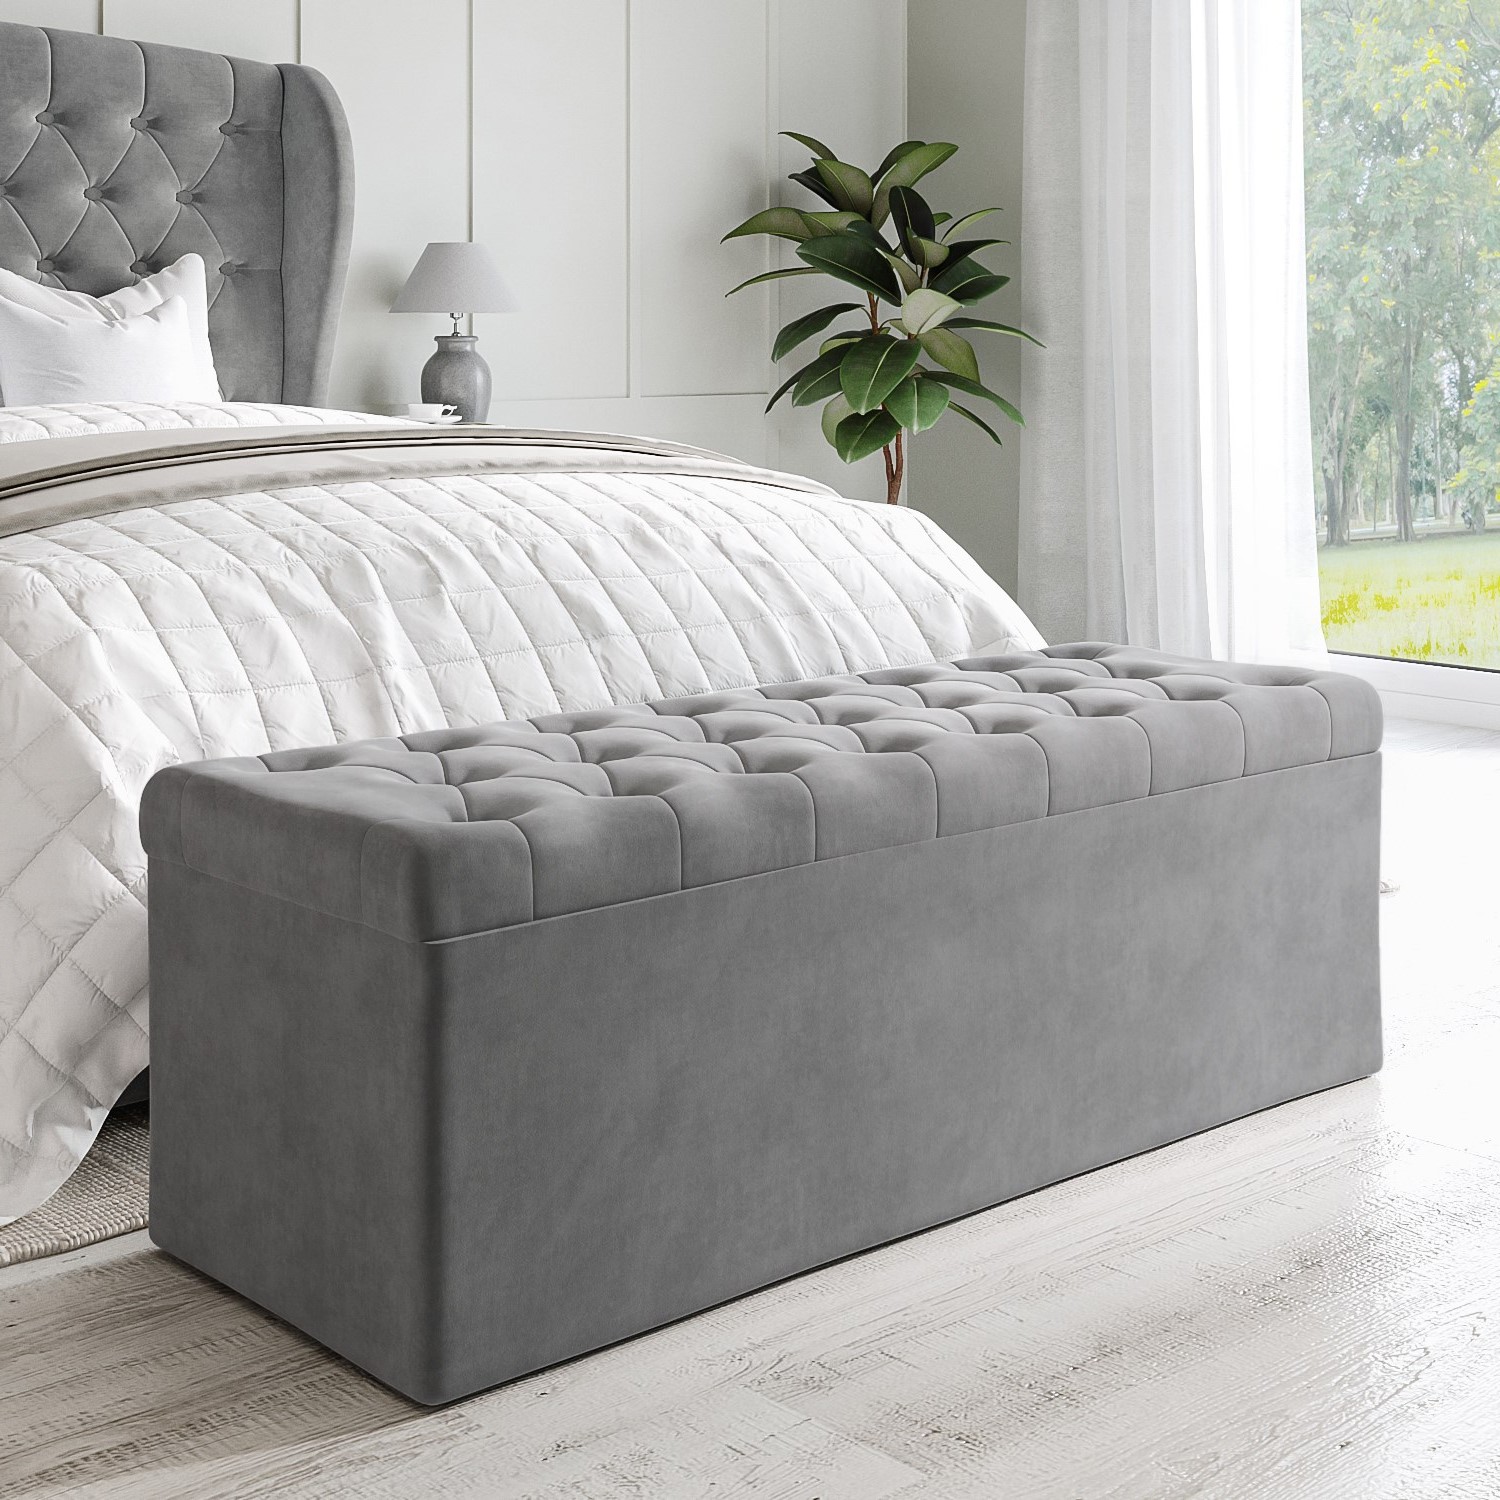 Read more about Grey velvet super king ottoman bed with matching blanket box